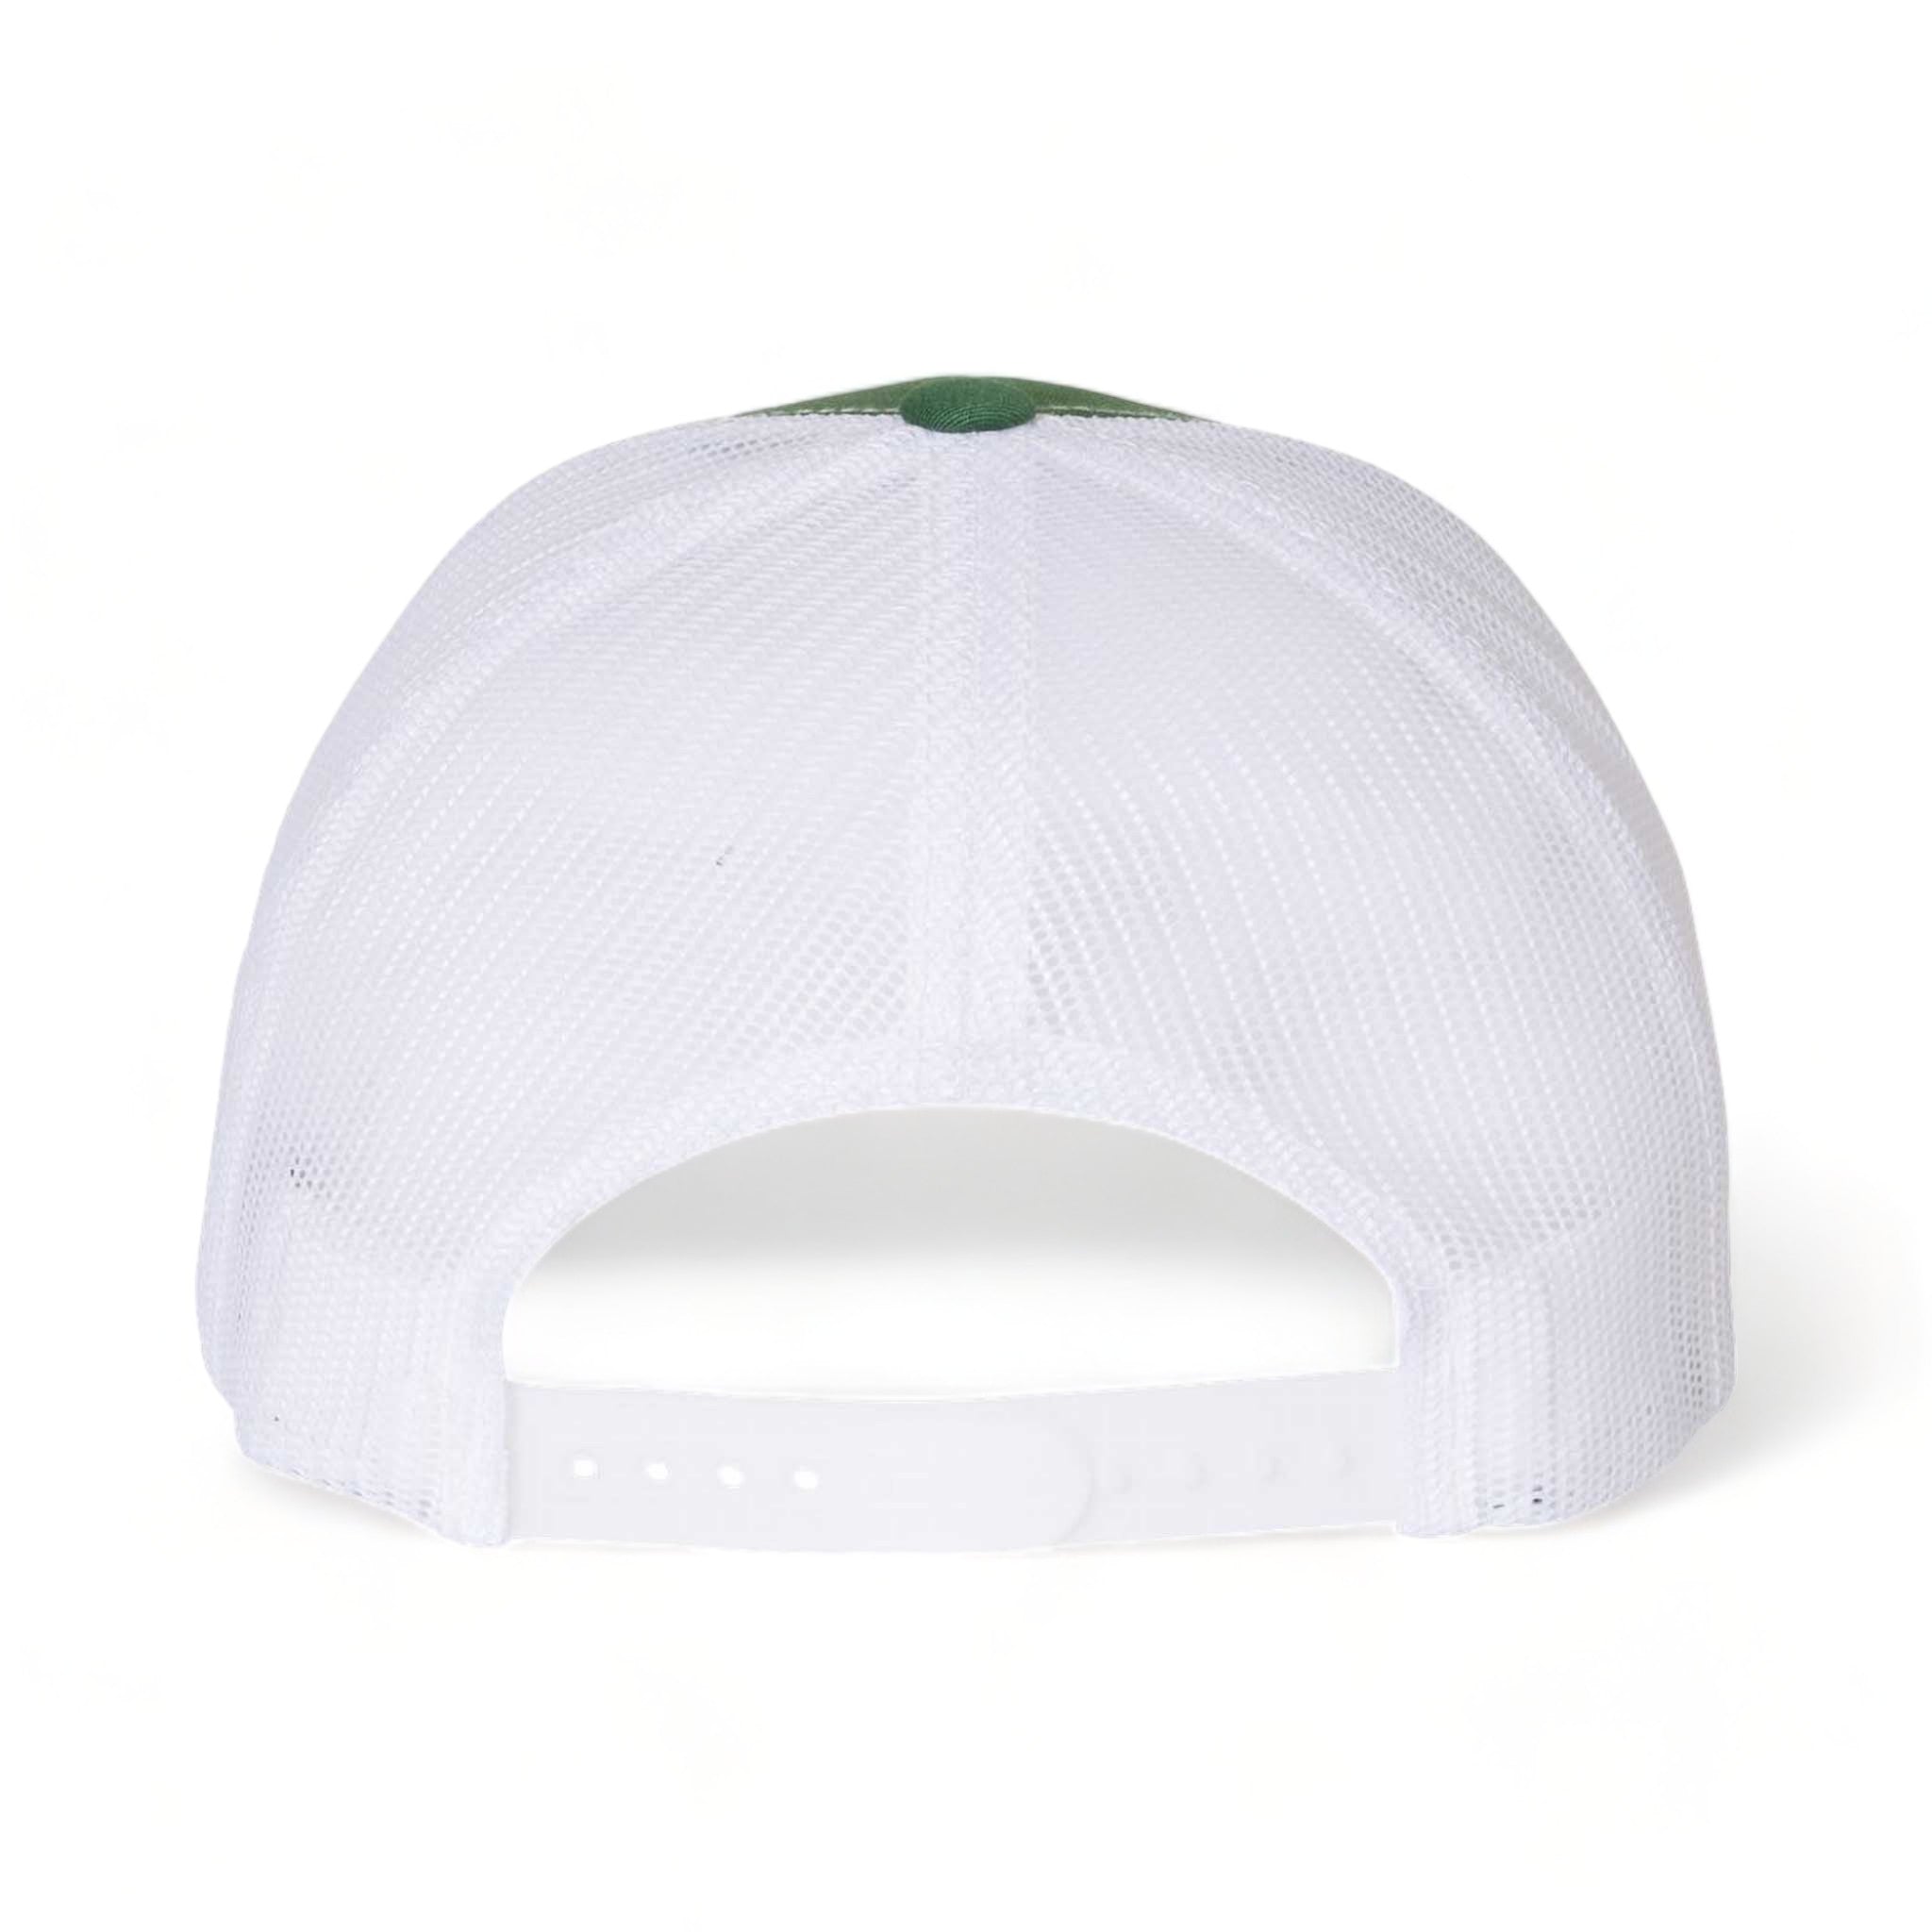 Back view of YP Classics 6606 custom hat in evergreen and white